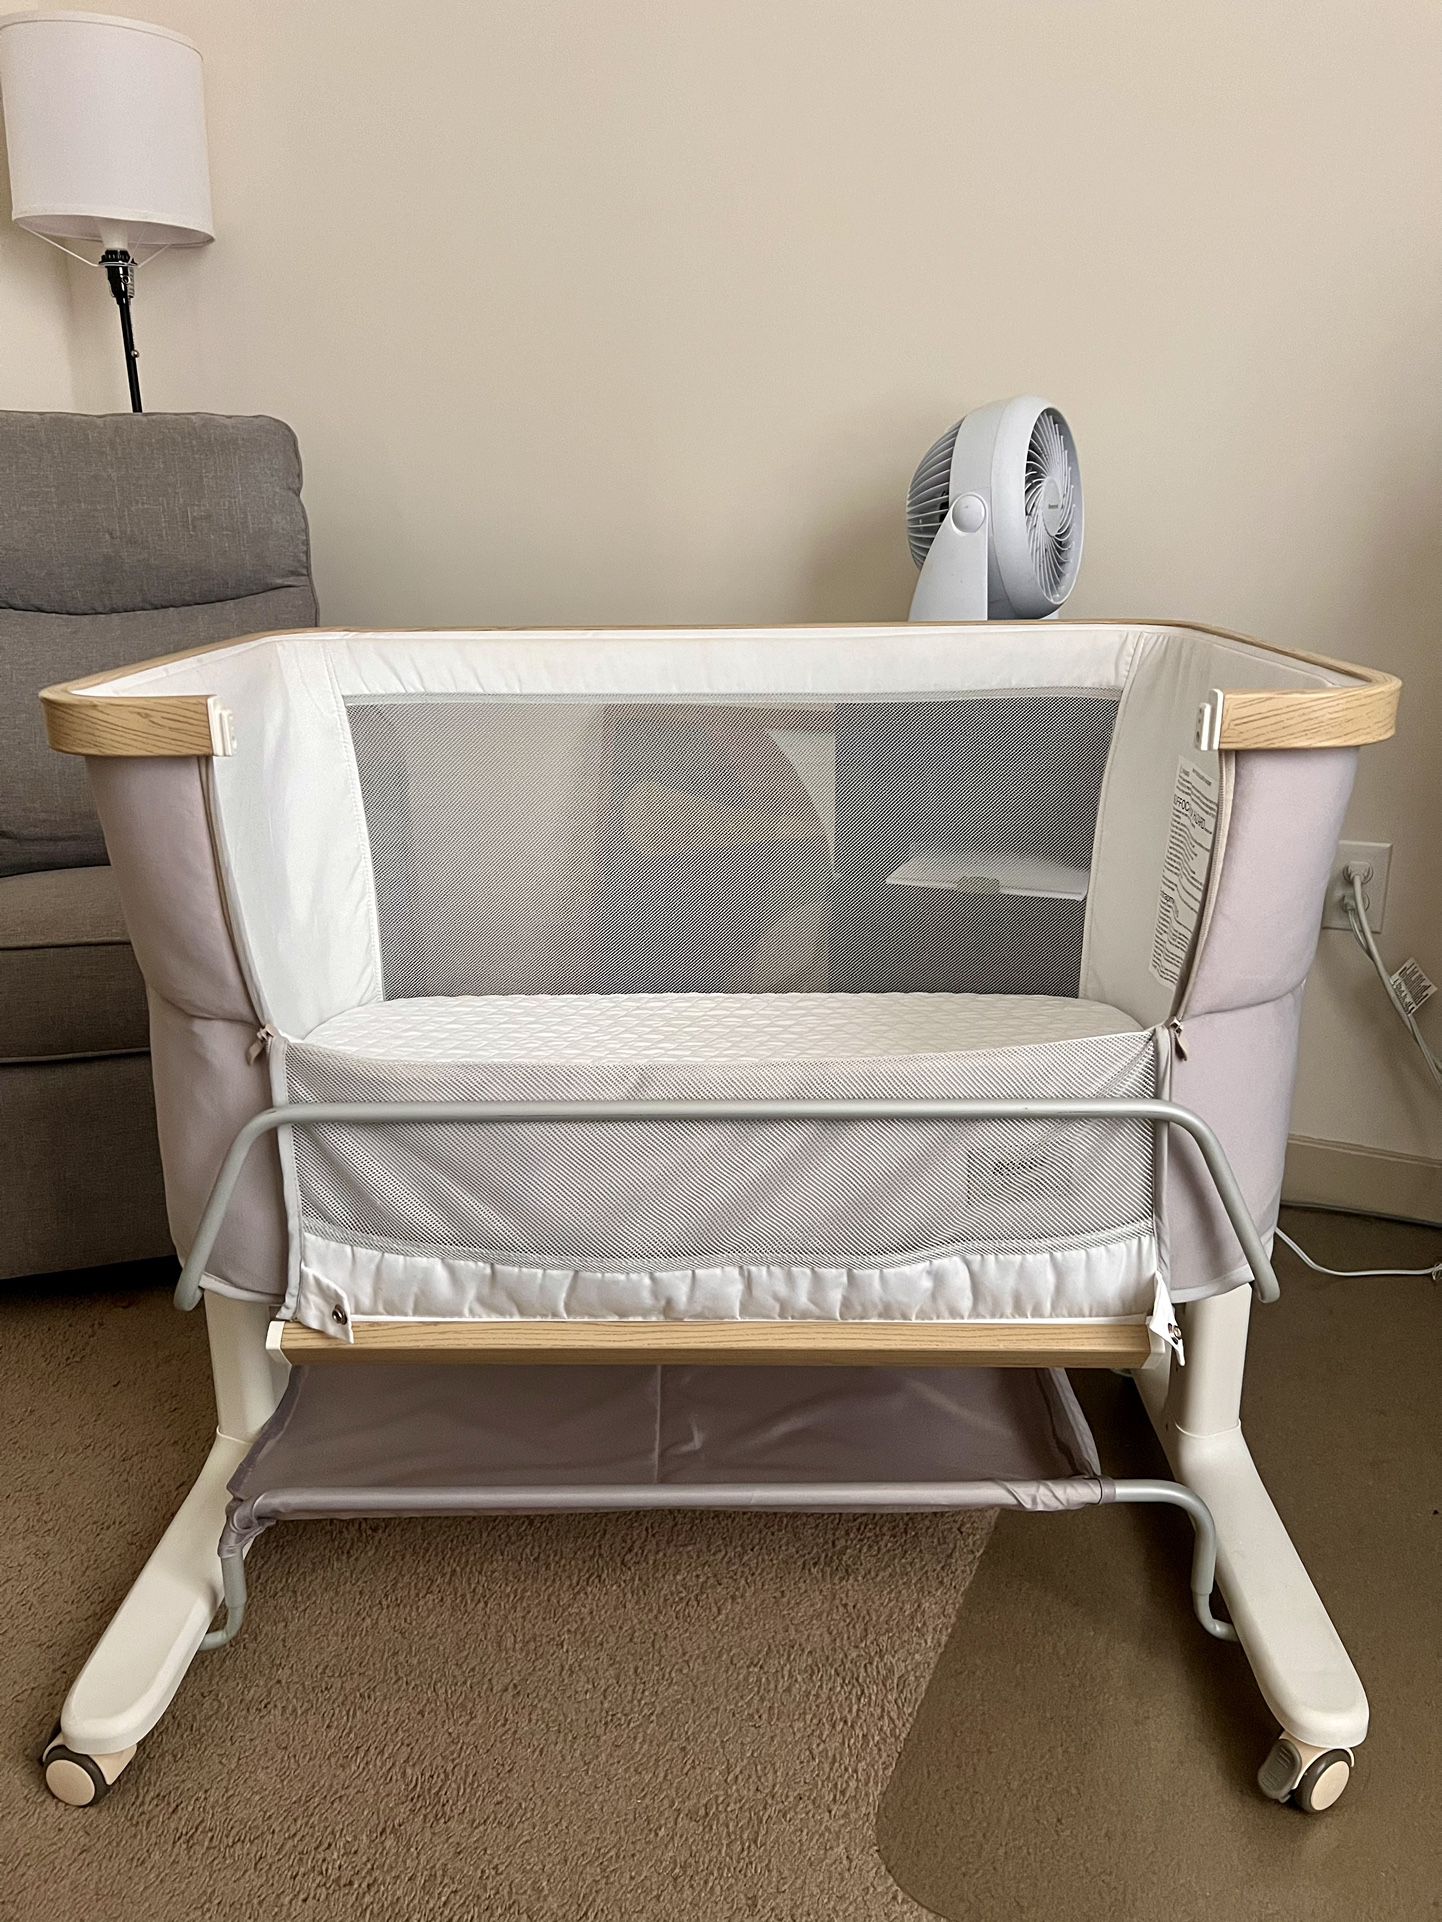 Bed Sharing Co Sleeping Baby Rolling Crib Bassinet With Storage